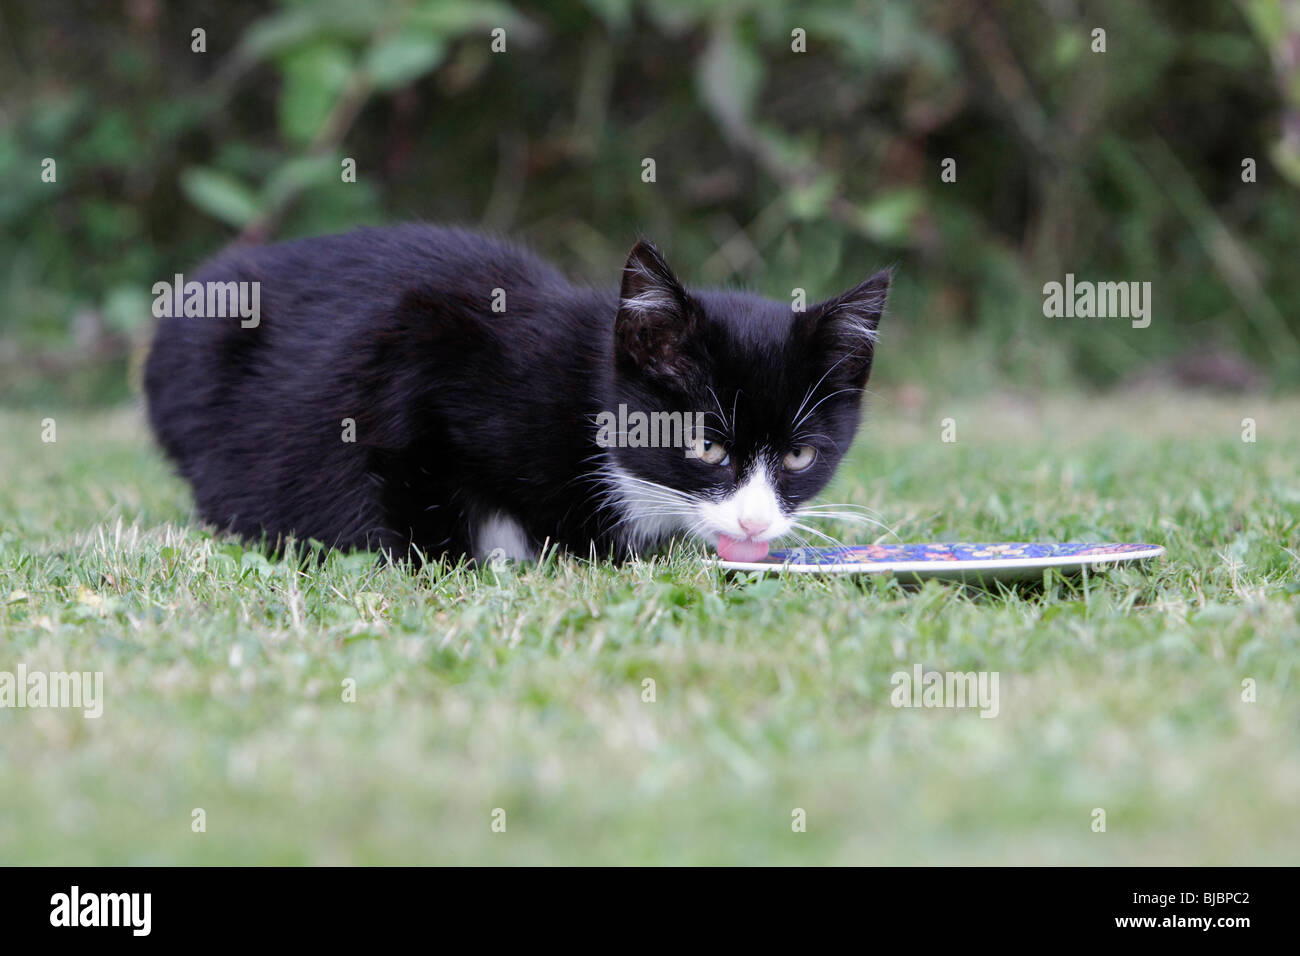 Cat, young black kitten feeding from plate in garden Stock Photo